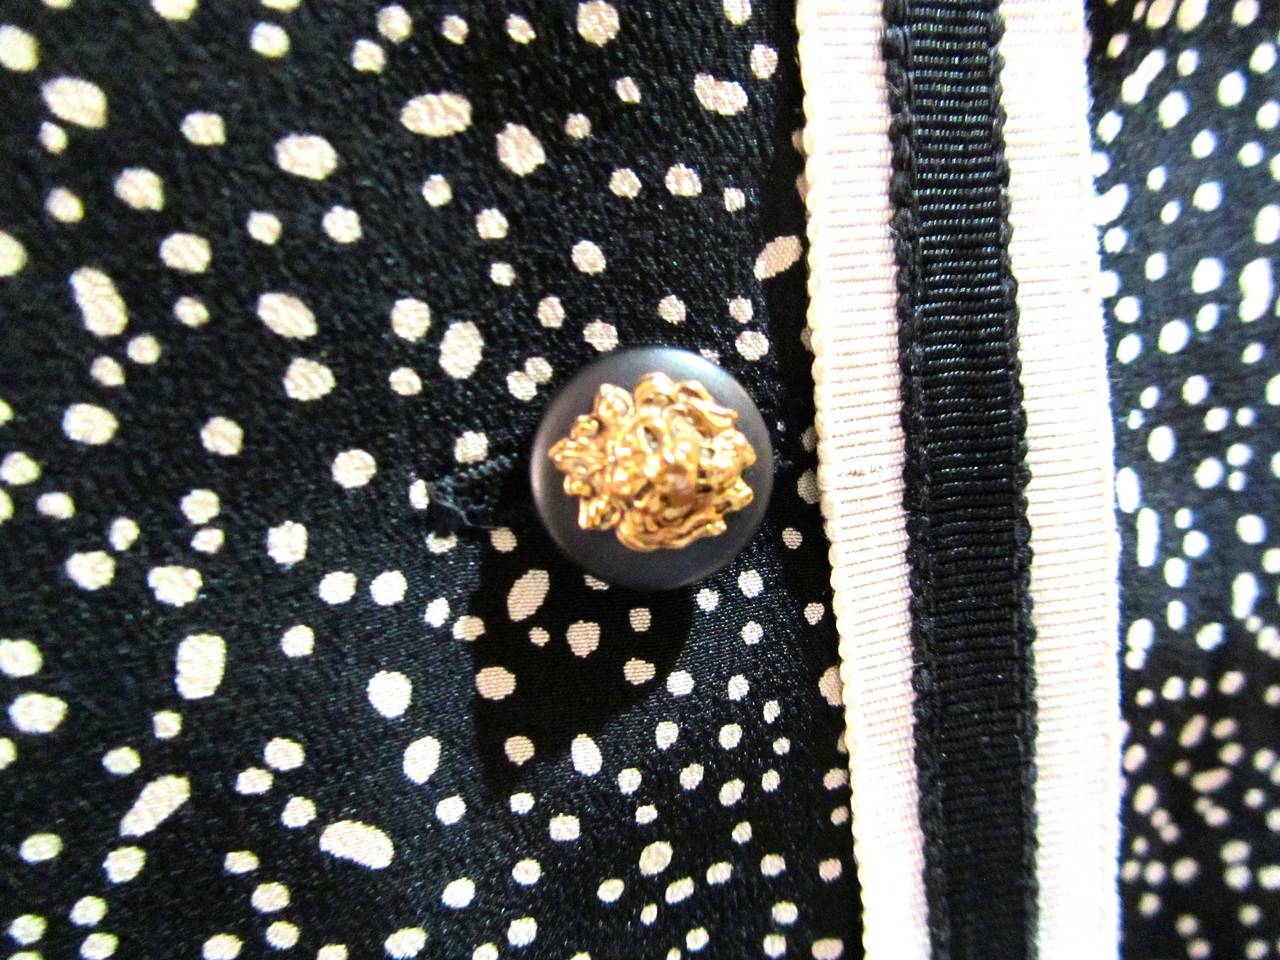 Chanel Silk Suit - Black and Cream Fabric with Iconic Lion Buttons - 1970's For Sale 3